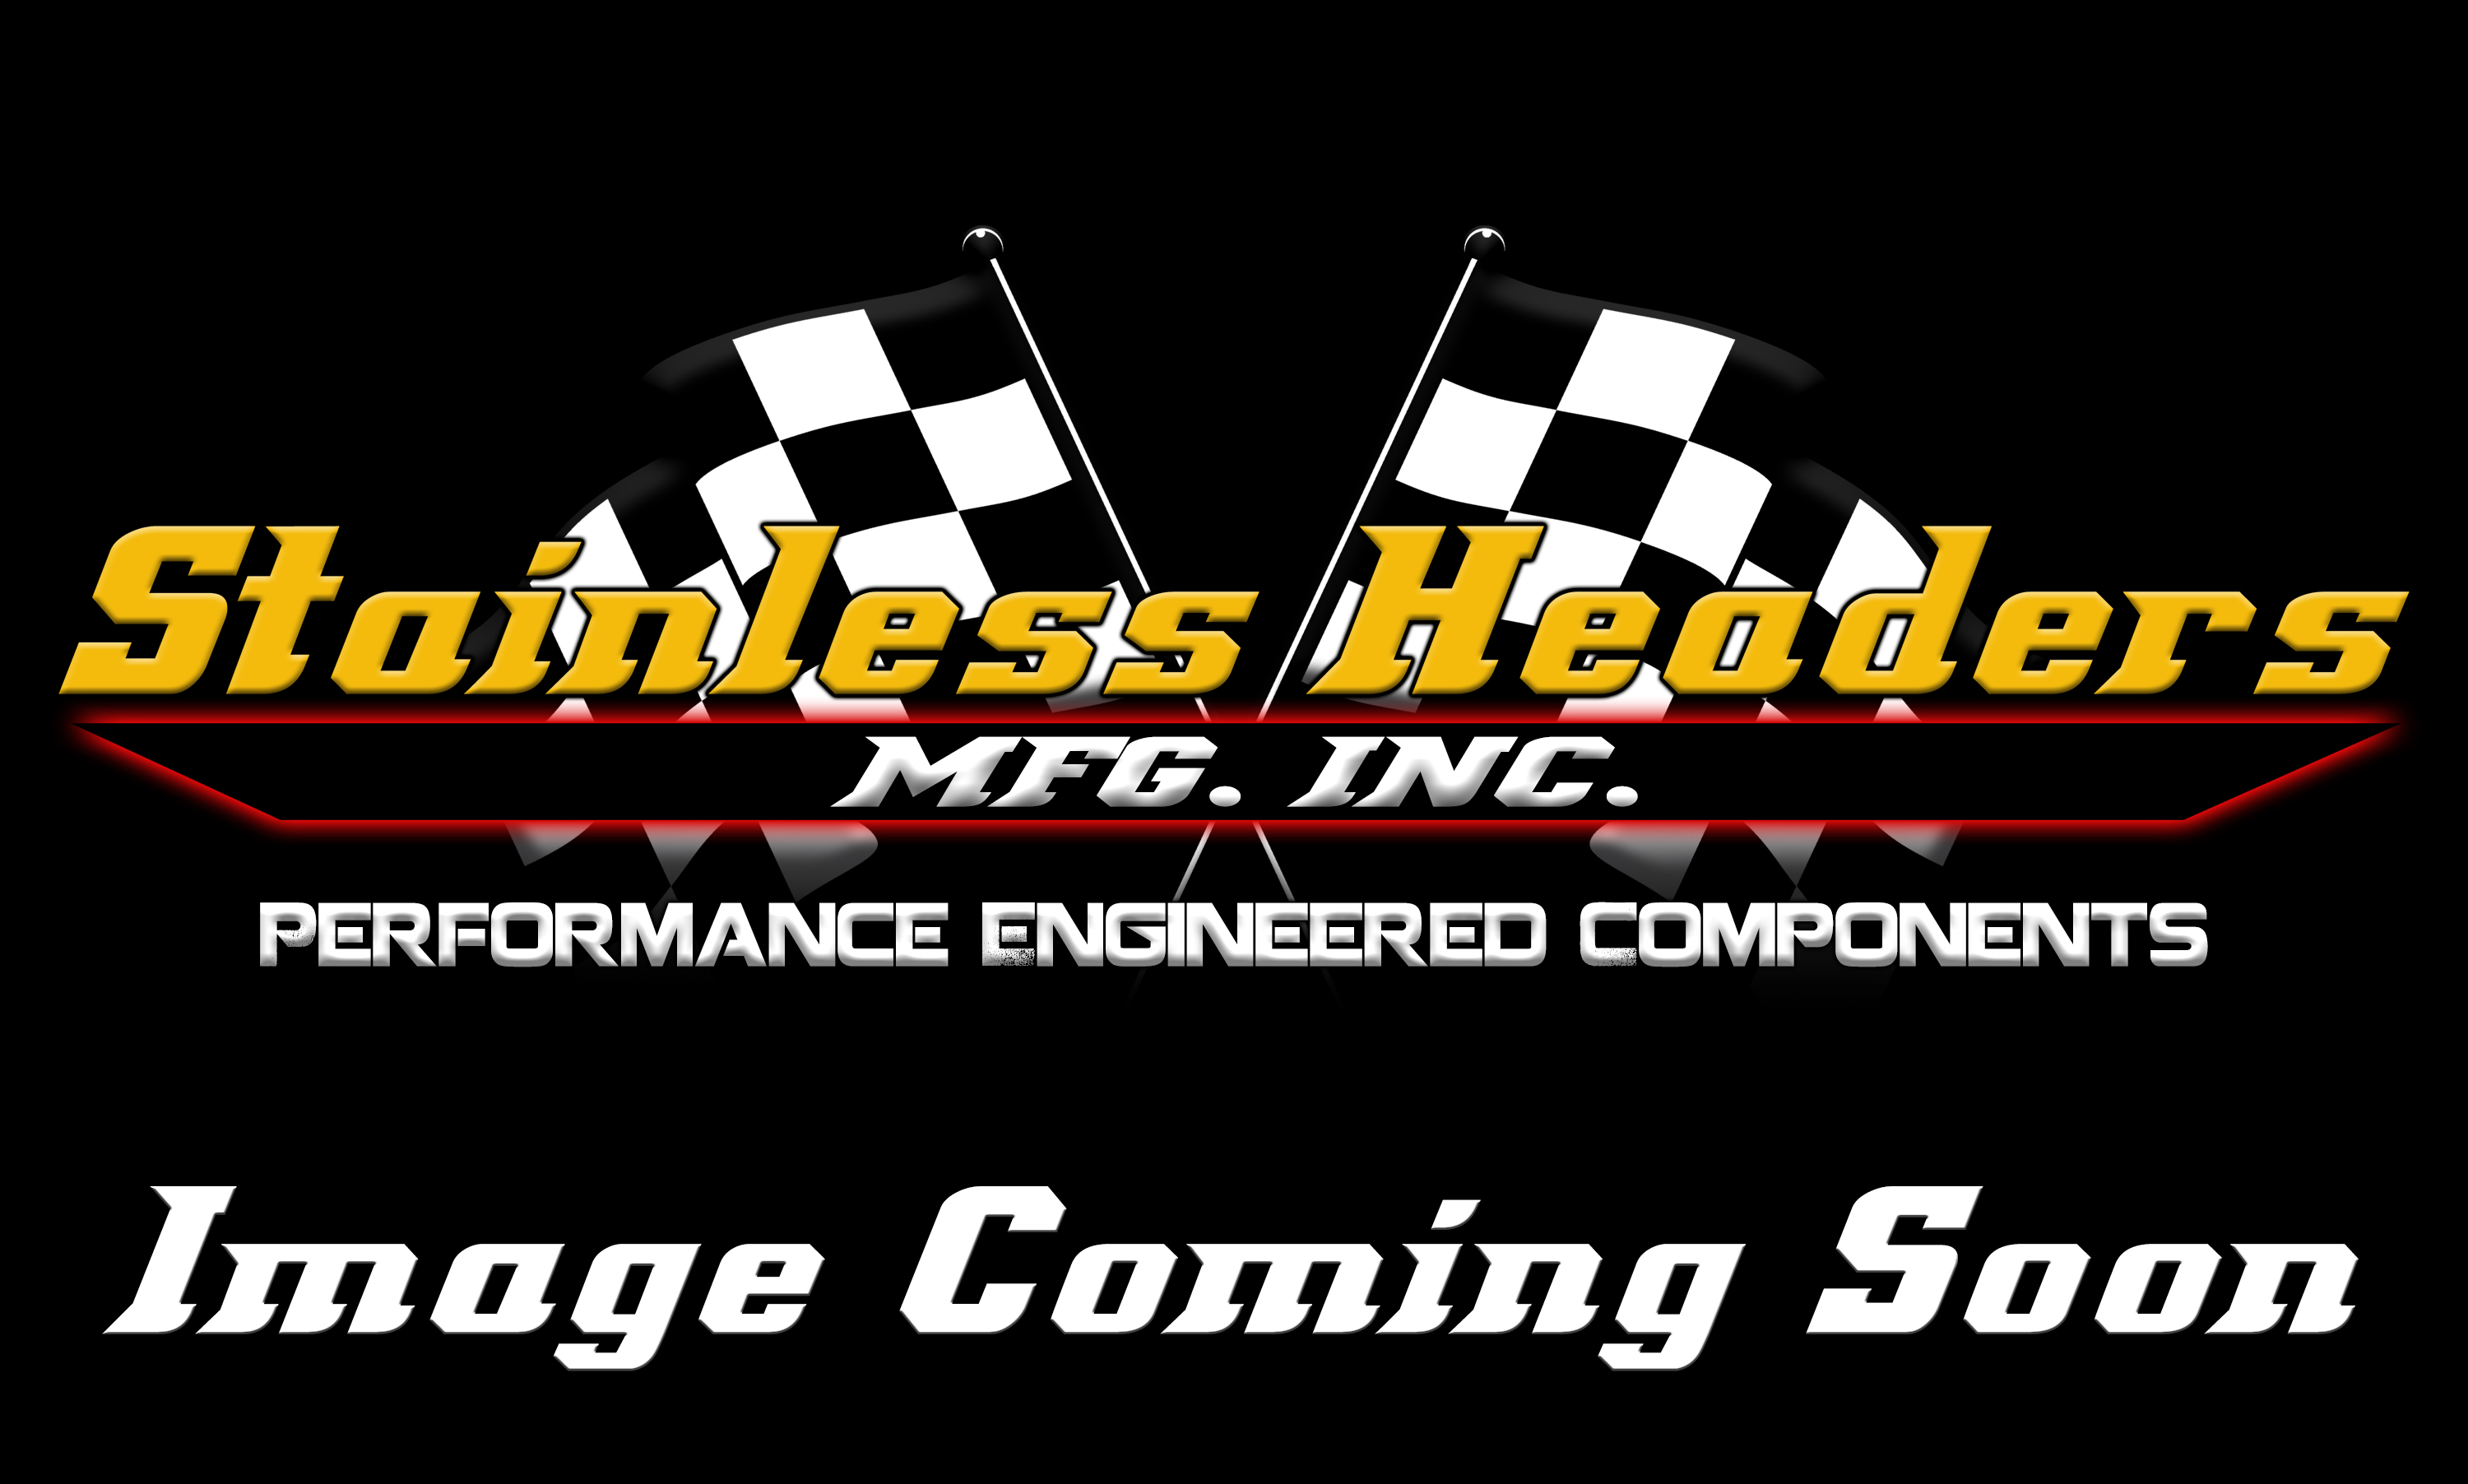 Stainless Headers - 2 1/2" Primary 6 into 1 Performance Merge Collector-16ga 304ss - Image 1